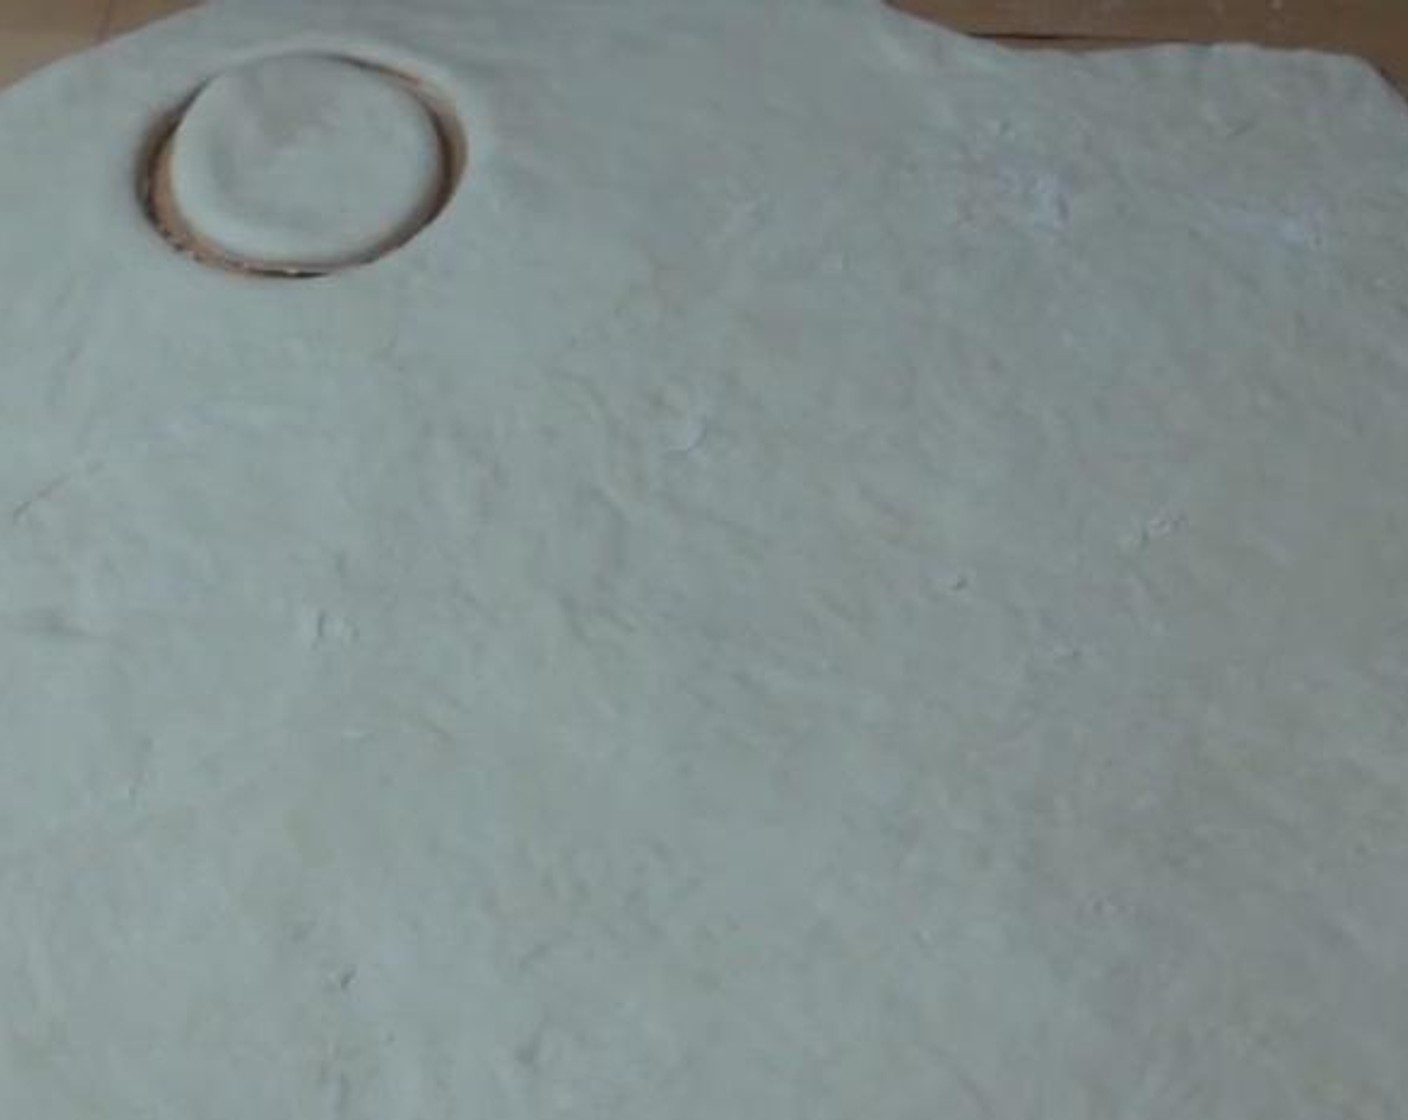 step 4 Using any circular object(like a glass), cut circular pieces out from the dough